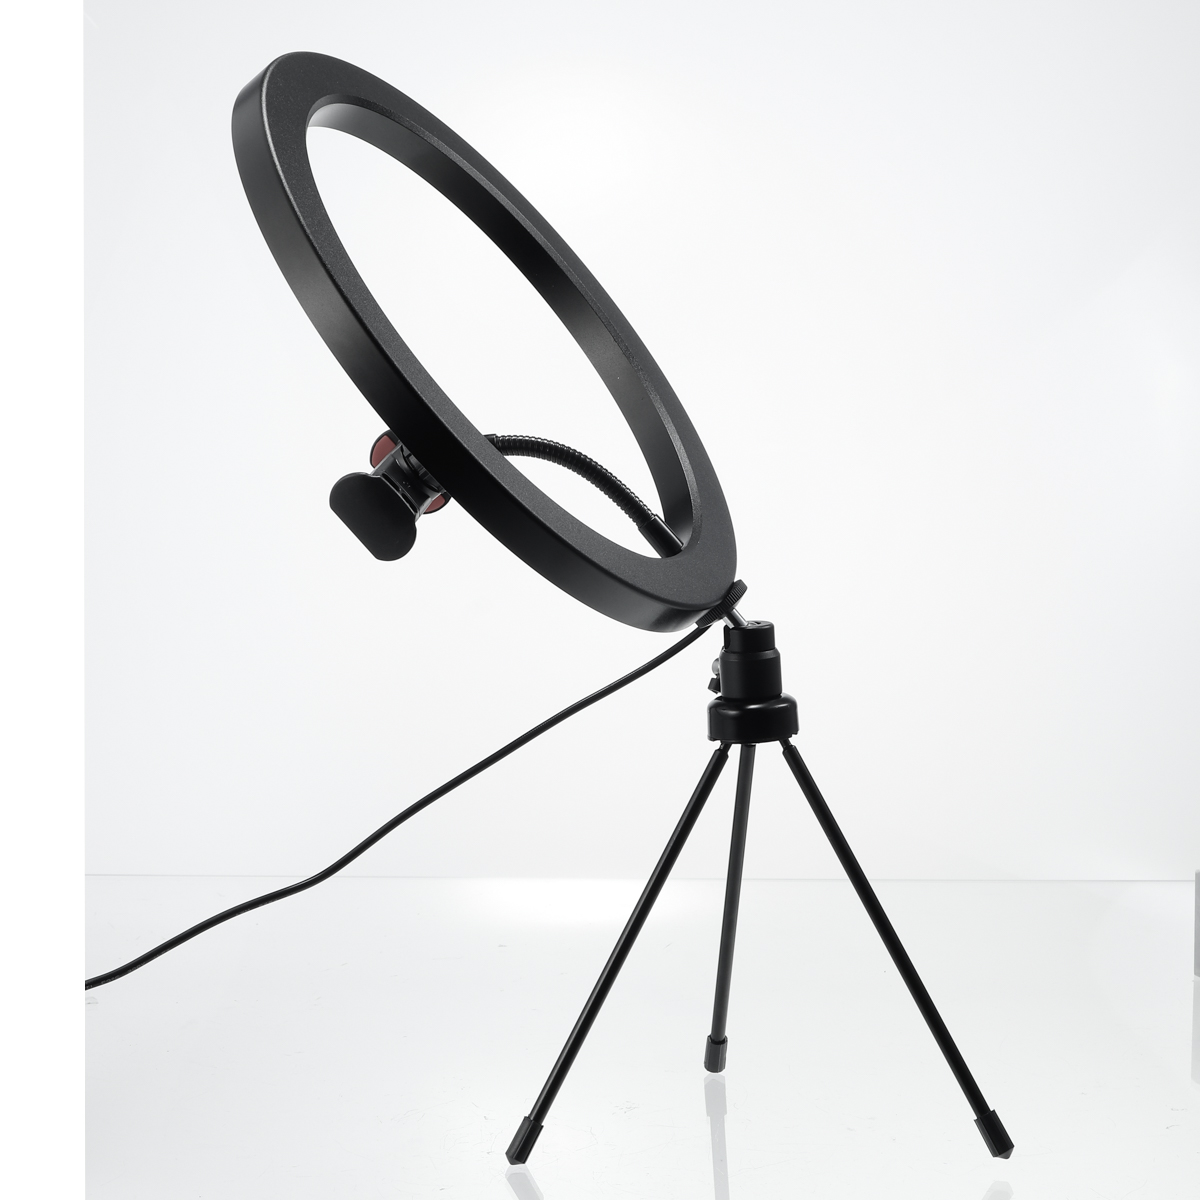 Dimmable-LED-Ring-Light-Lamp-18CM-26CM-Fill-Light-for-Makeup-Live-Stream-Selfie-Photography-Video-Re-1680025-10